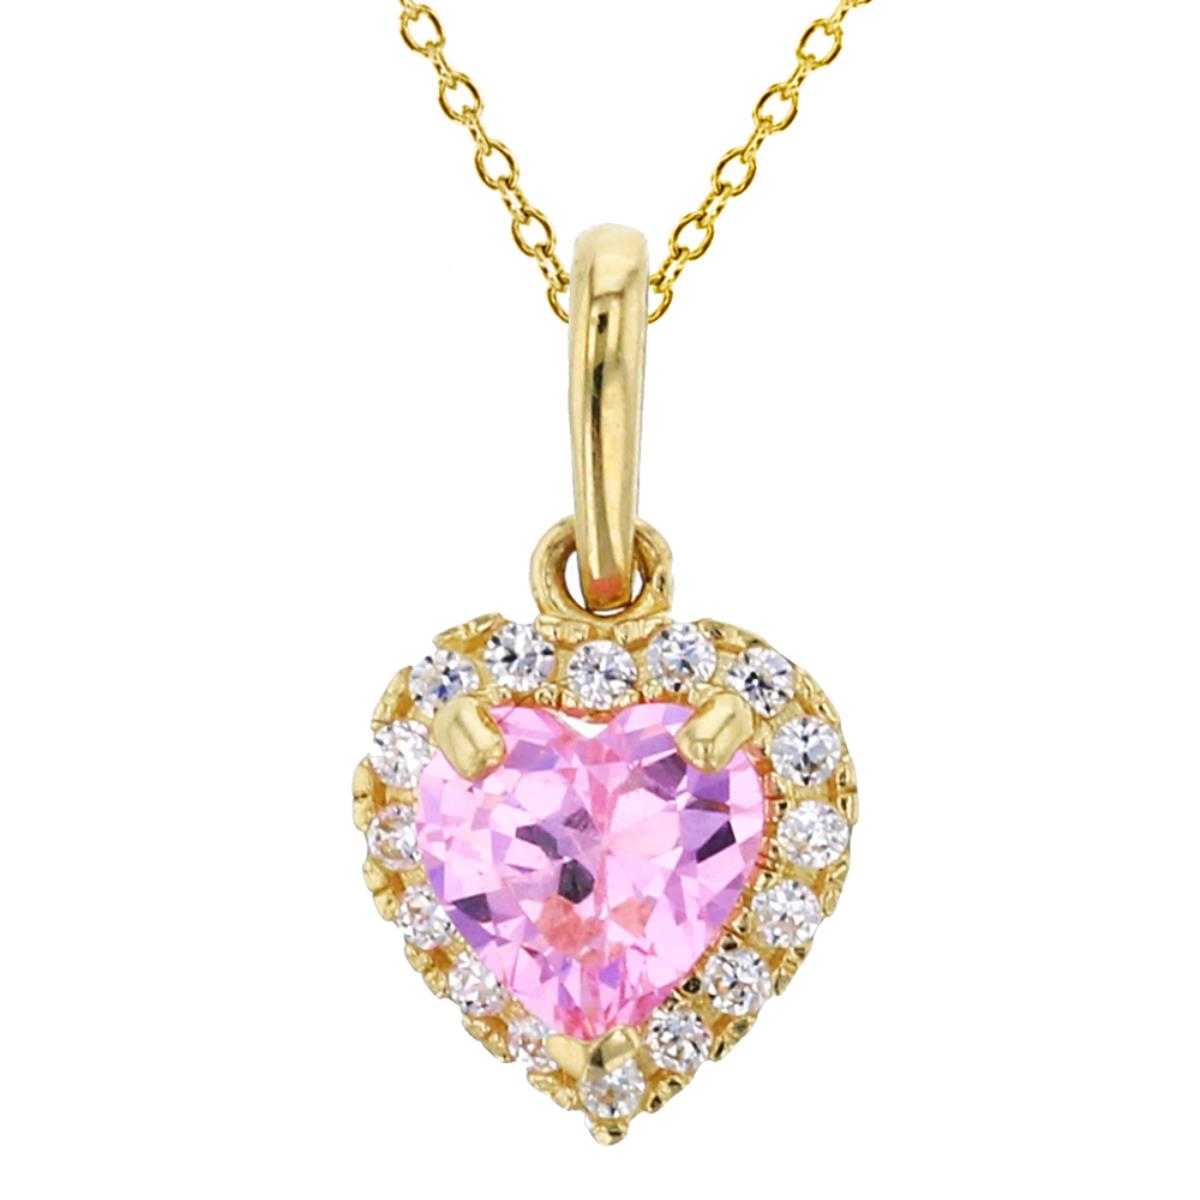 14K Yellow Gold 5mm Heart Cut Pink & CZ Halo Dangling 18" Necklace